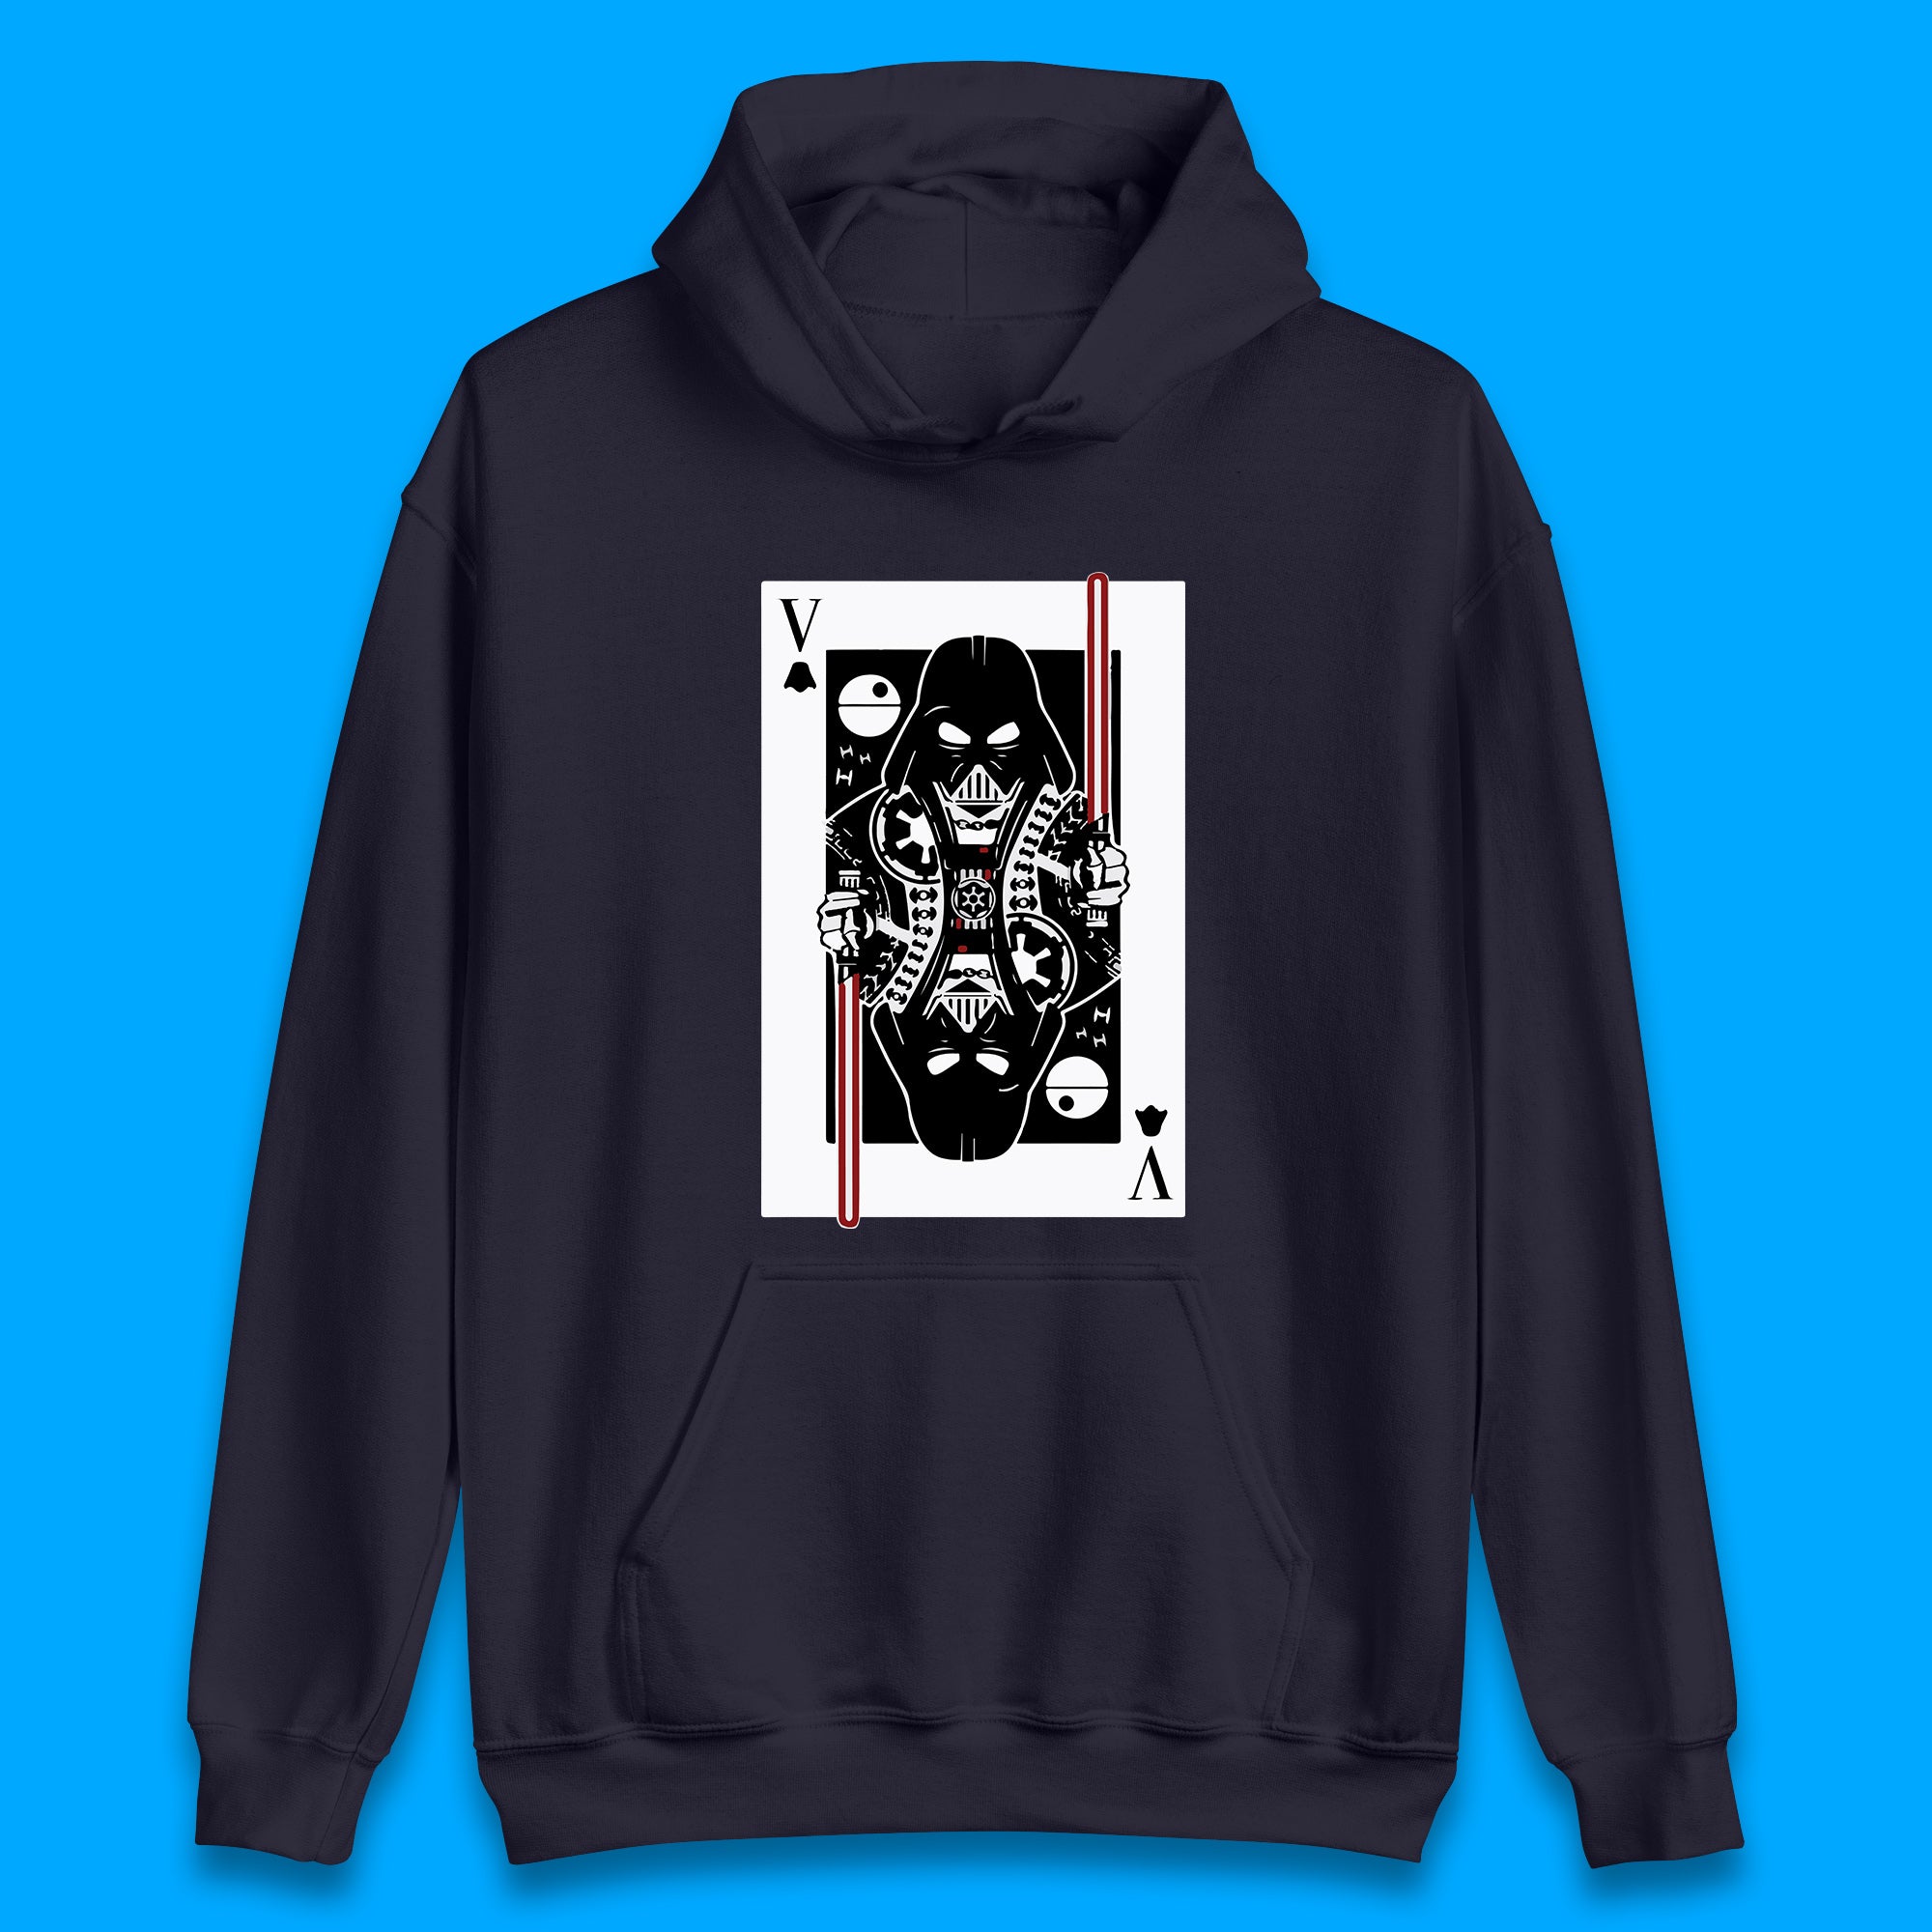 Star Wars Fictional Character Darth Vader Playing Card Vader King Card Sci-fi Action Adventure Movie 46th Anniversary Unisex Hoodie